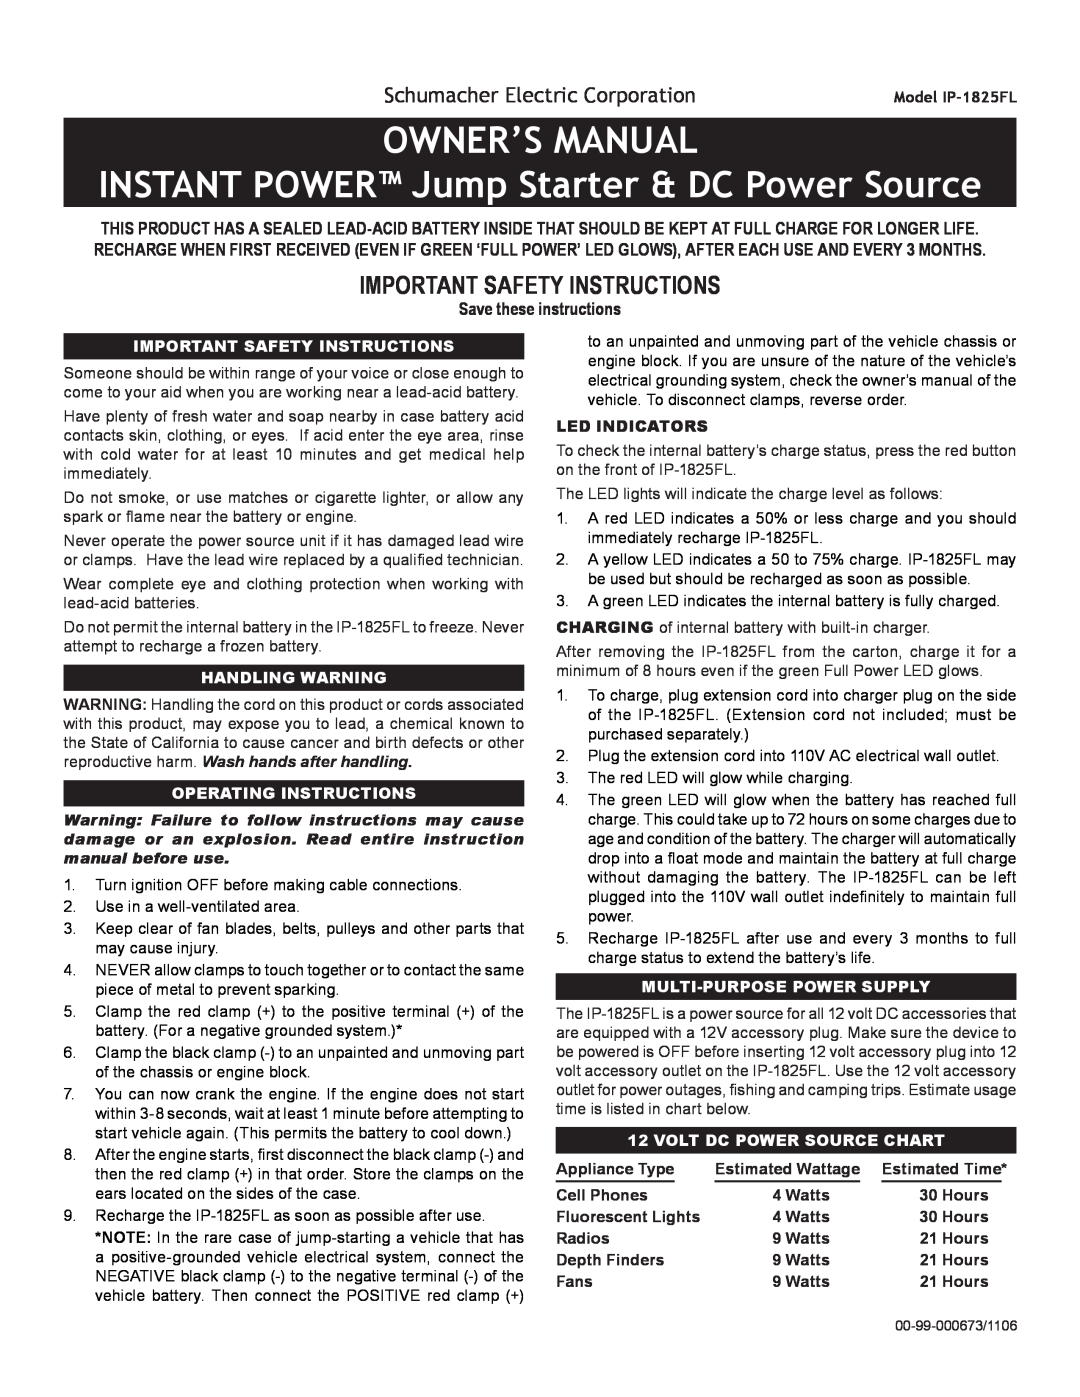 Schumacher IP-1825FL owner manual OWNER’S MANUAL INSTANT POWER Jump Starter & DC Power Source, Save these instructions 